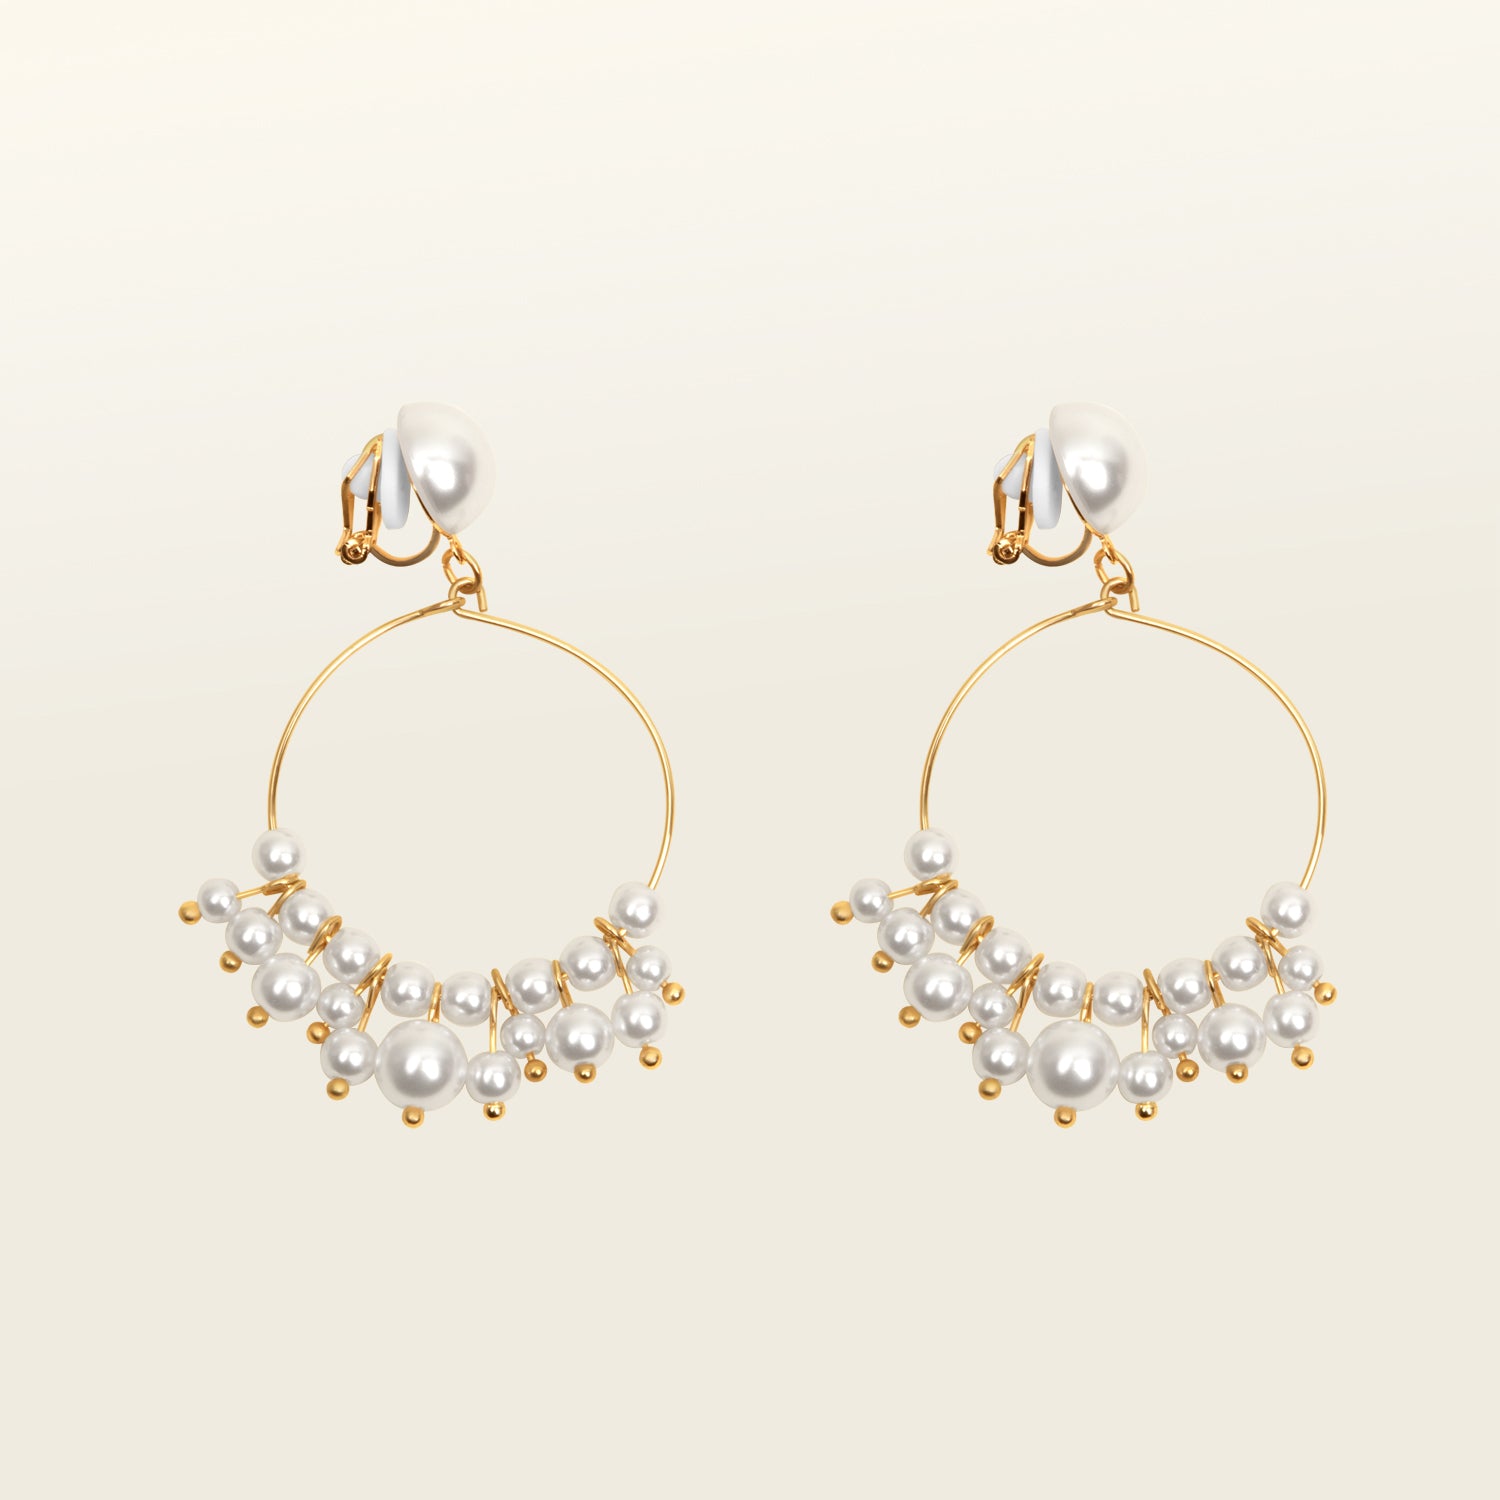 Image of the Delphine Clip On Earrings feature a gold-tone copper alloy and a Simulated Faux Pearl. The closure type is a padded clip-on earring with removable rubber padding, making it ideal for all ear types (including thick/large ears, sensitive ears, small/thin ears, and stretched/healing ears). You can expect a secure hold for up to 12 hours of comfortable wear. Please note that this item is sold as a single pair.